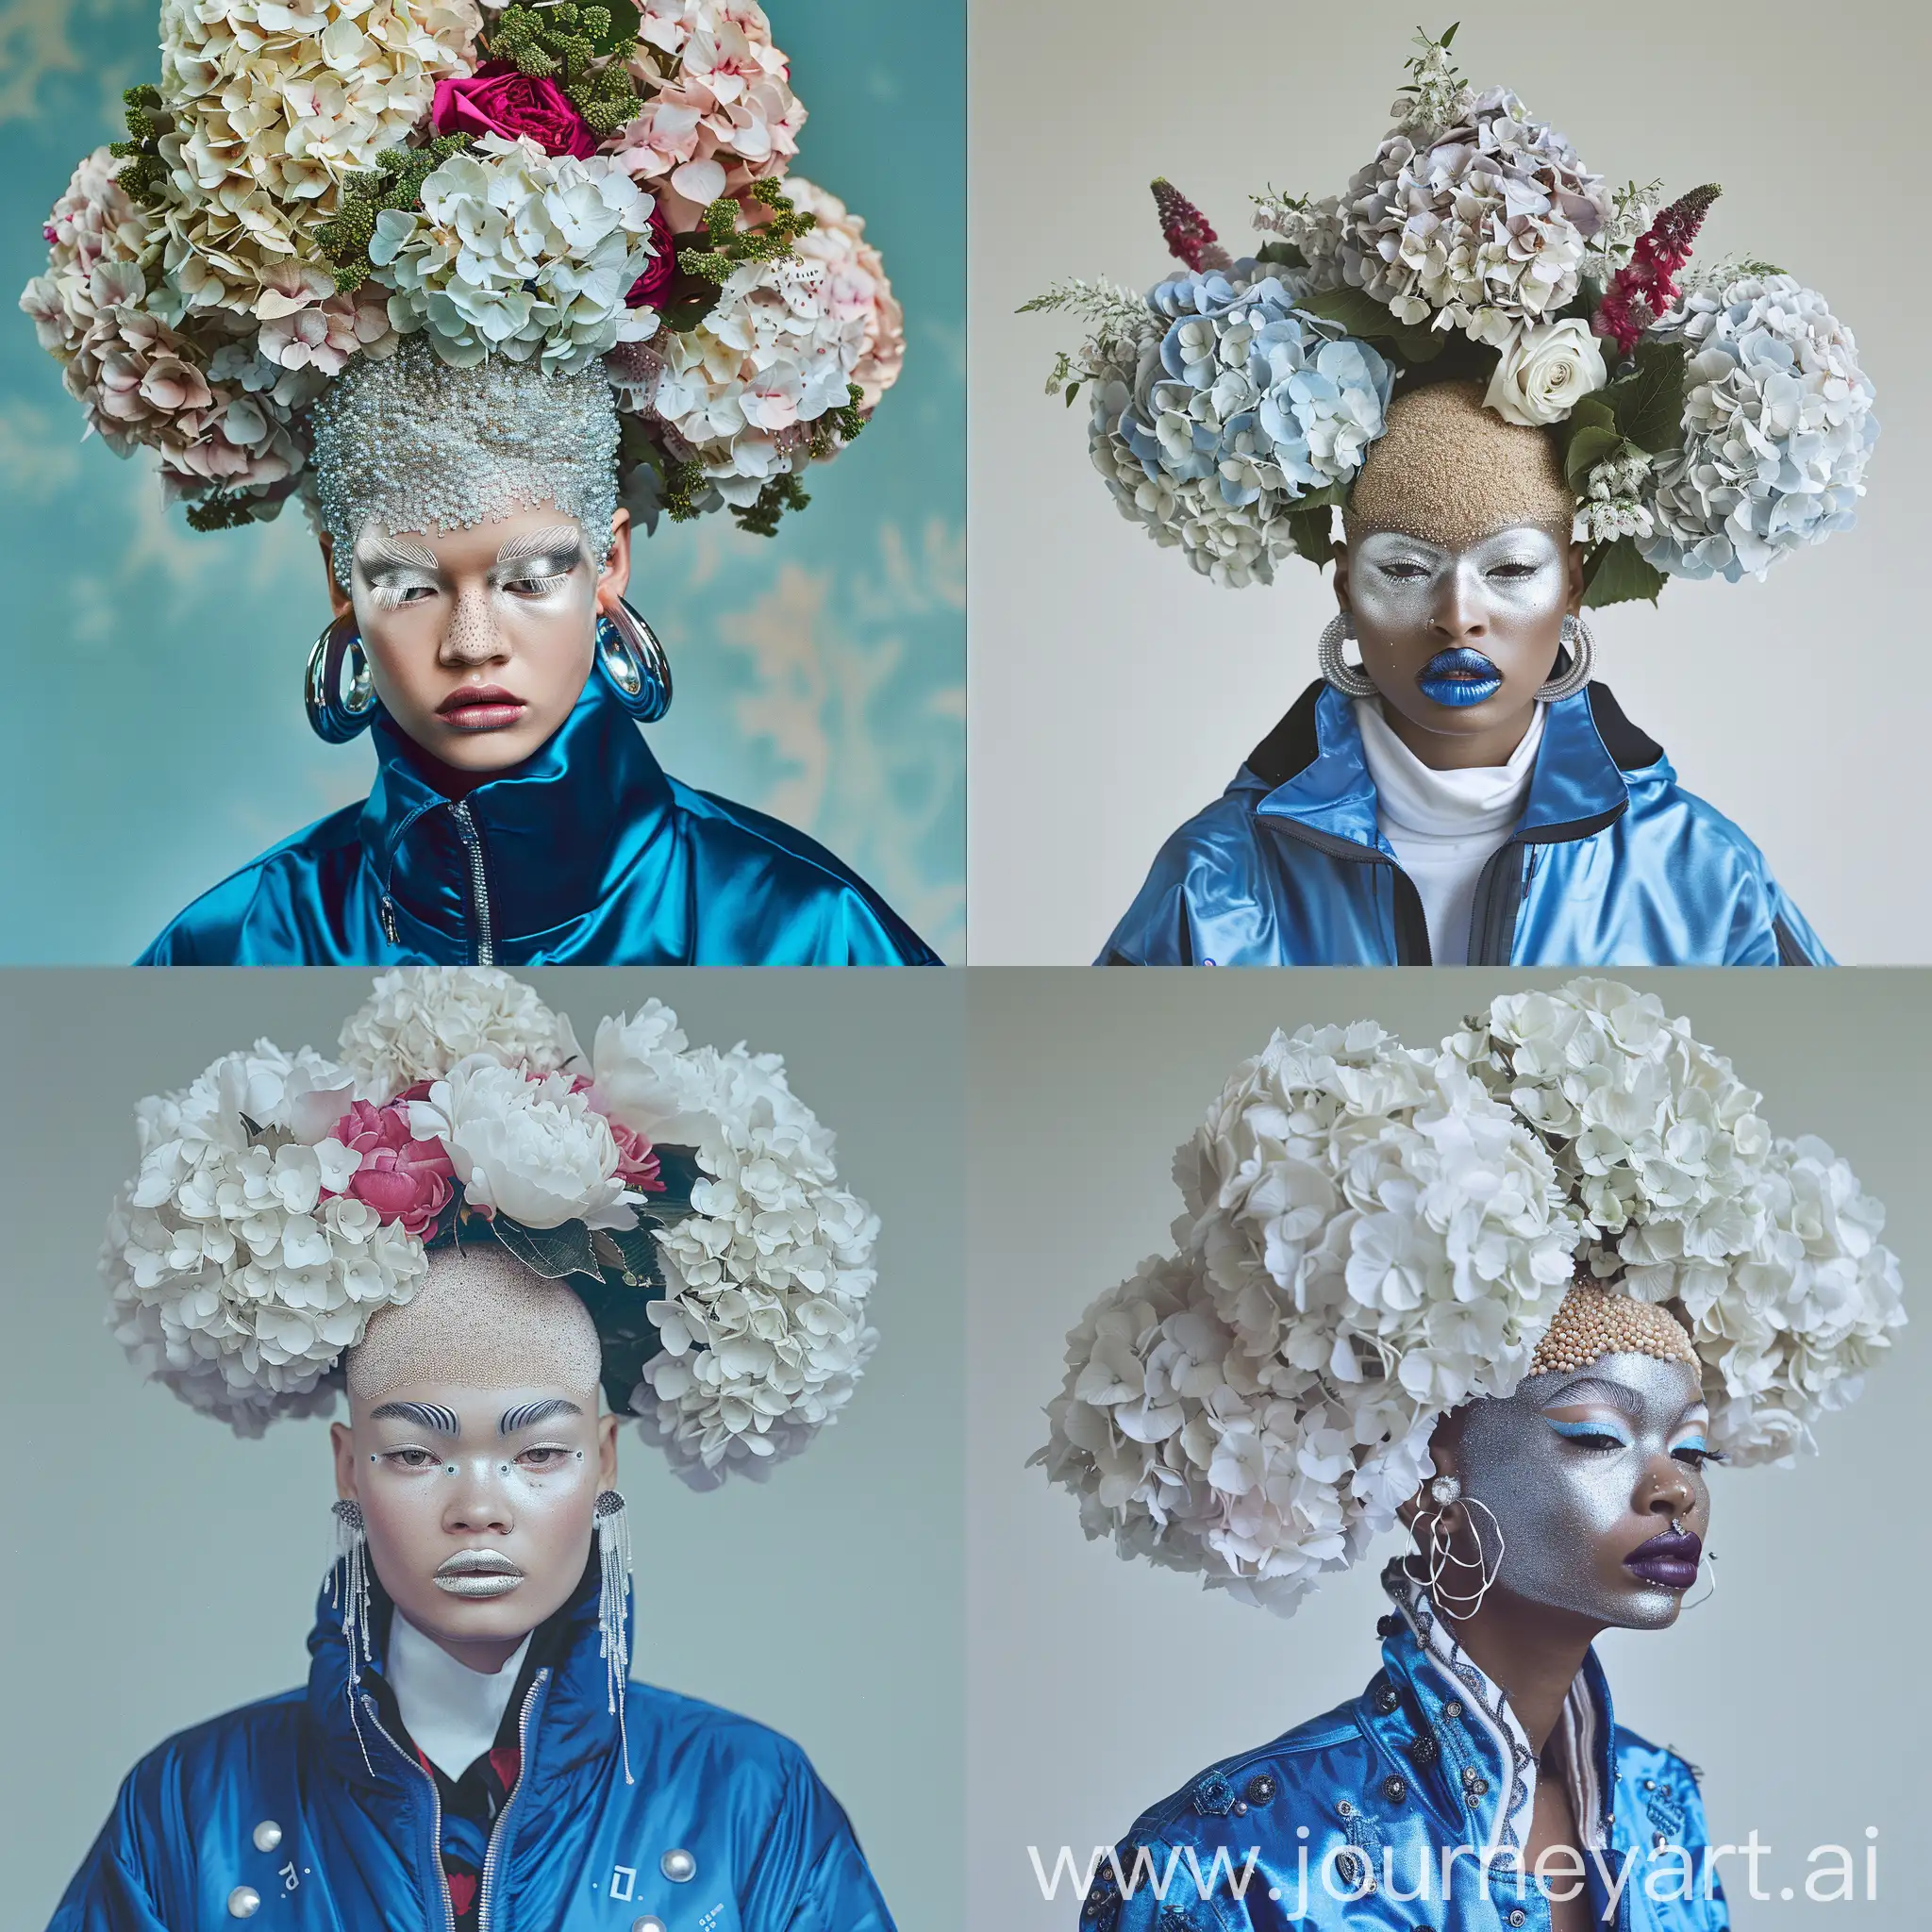 Studio-Portrait-of-90s-Model-with-Blue-Jacket-and-Floral-Headpiece